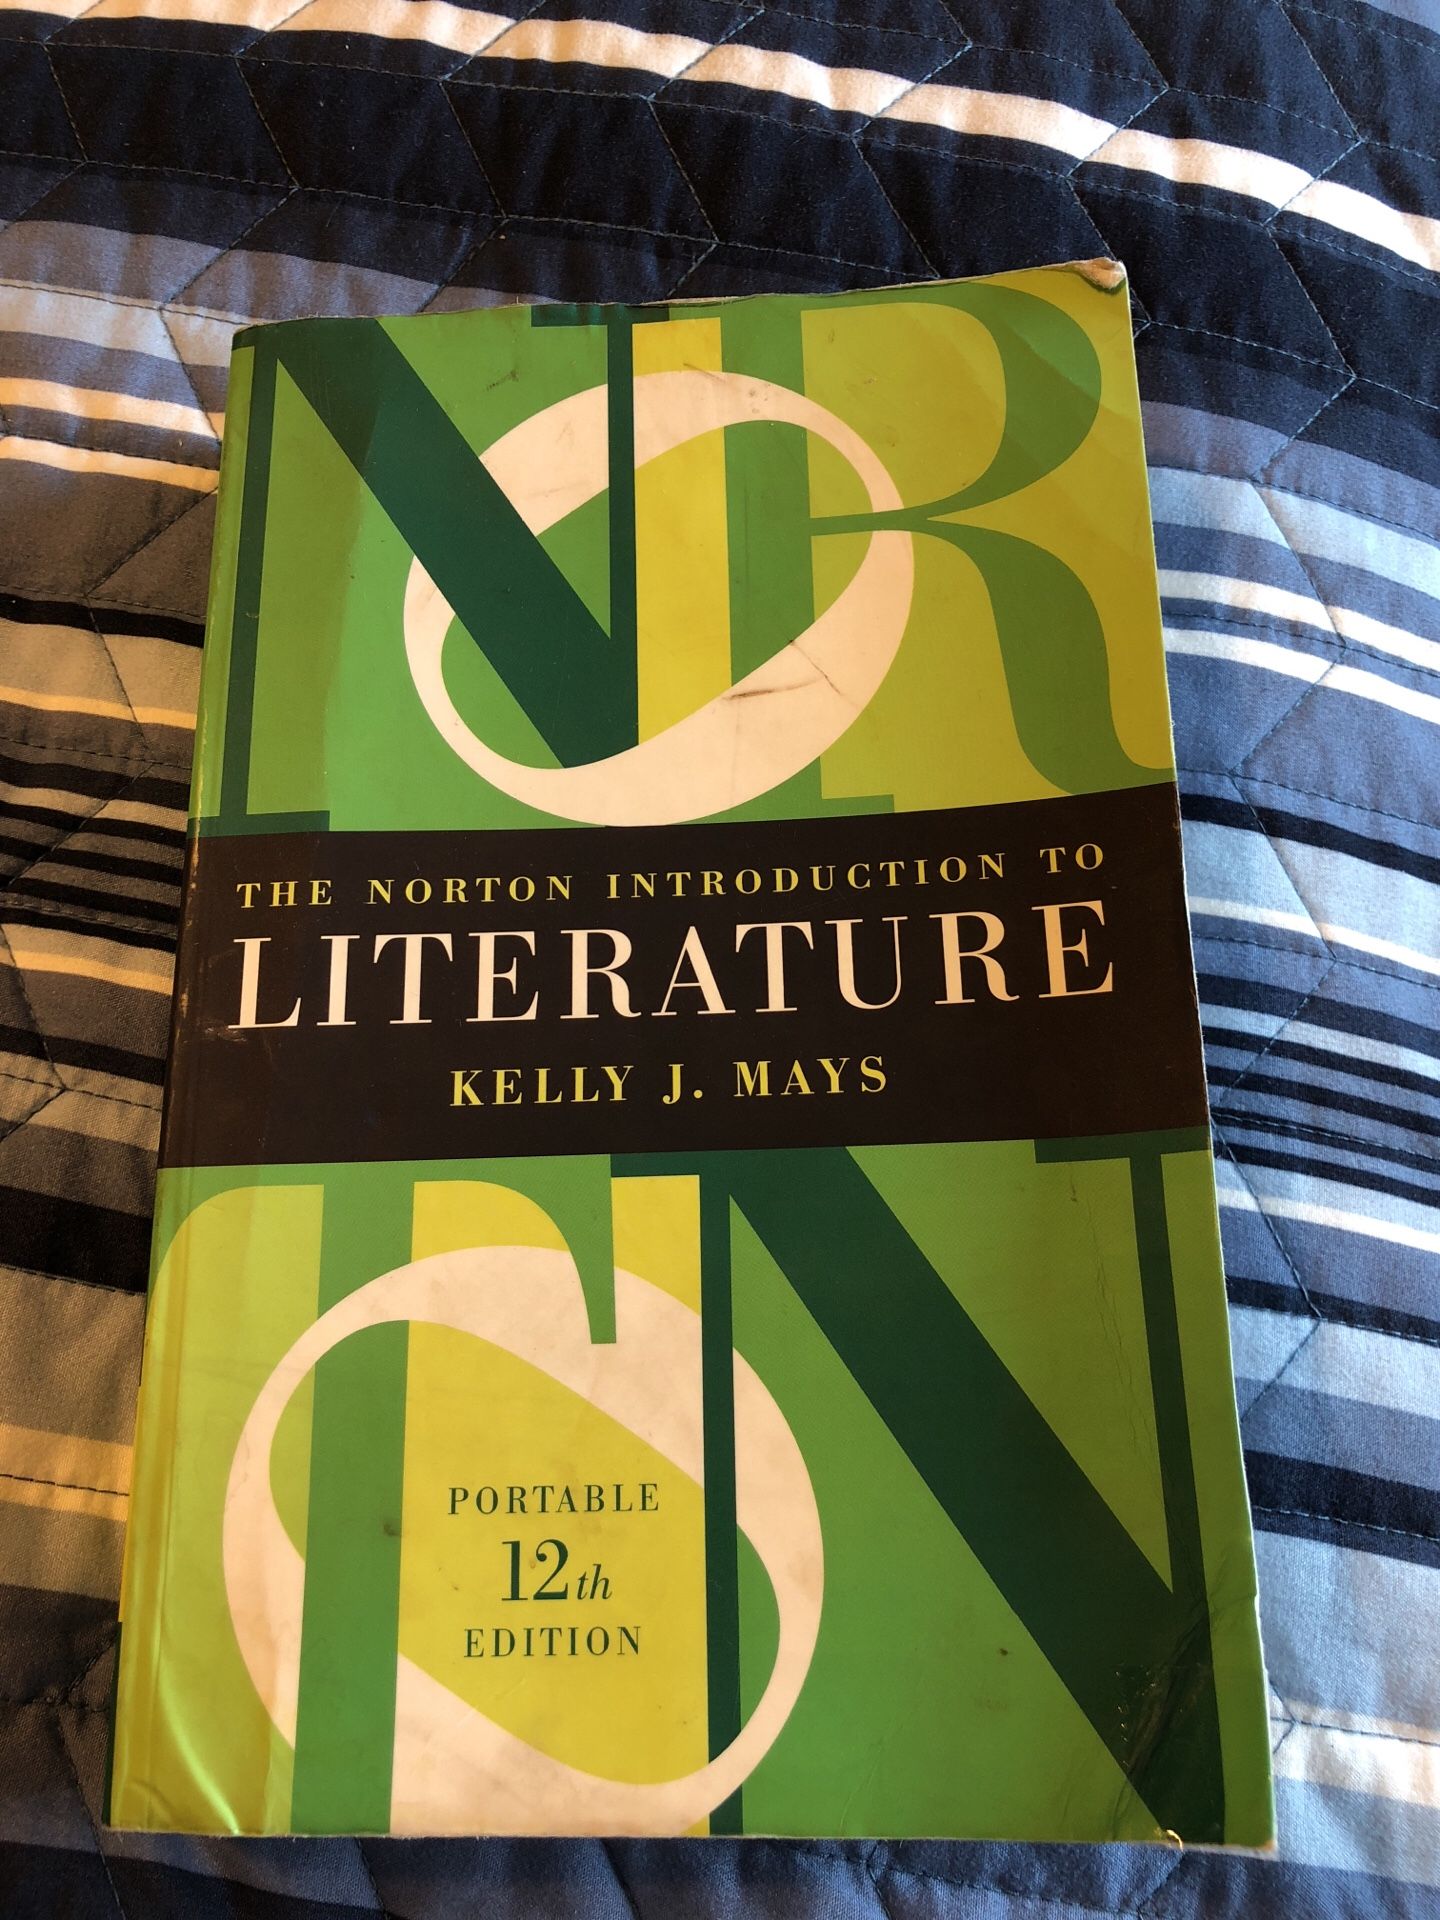 The Norton Introduction to Literature!